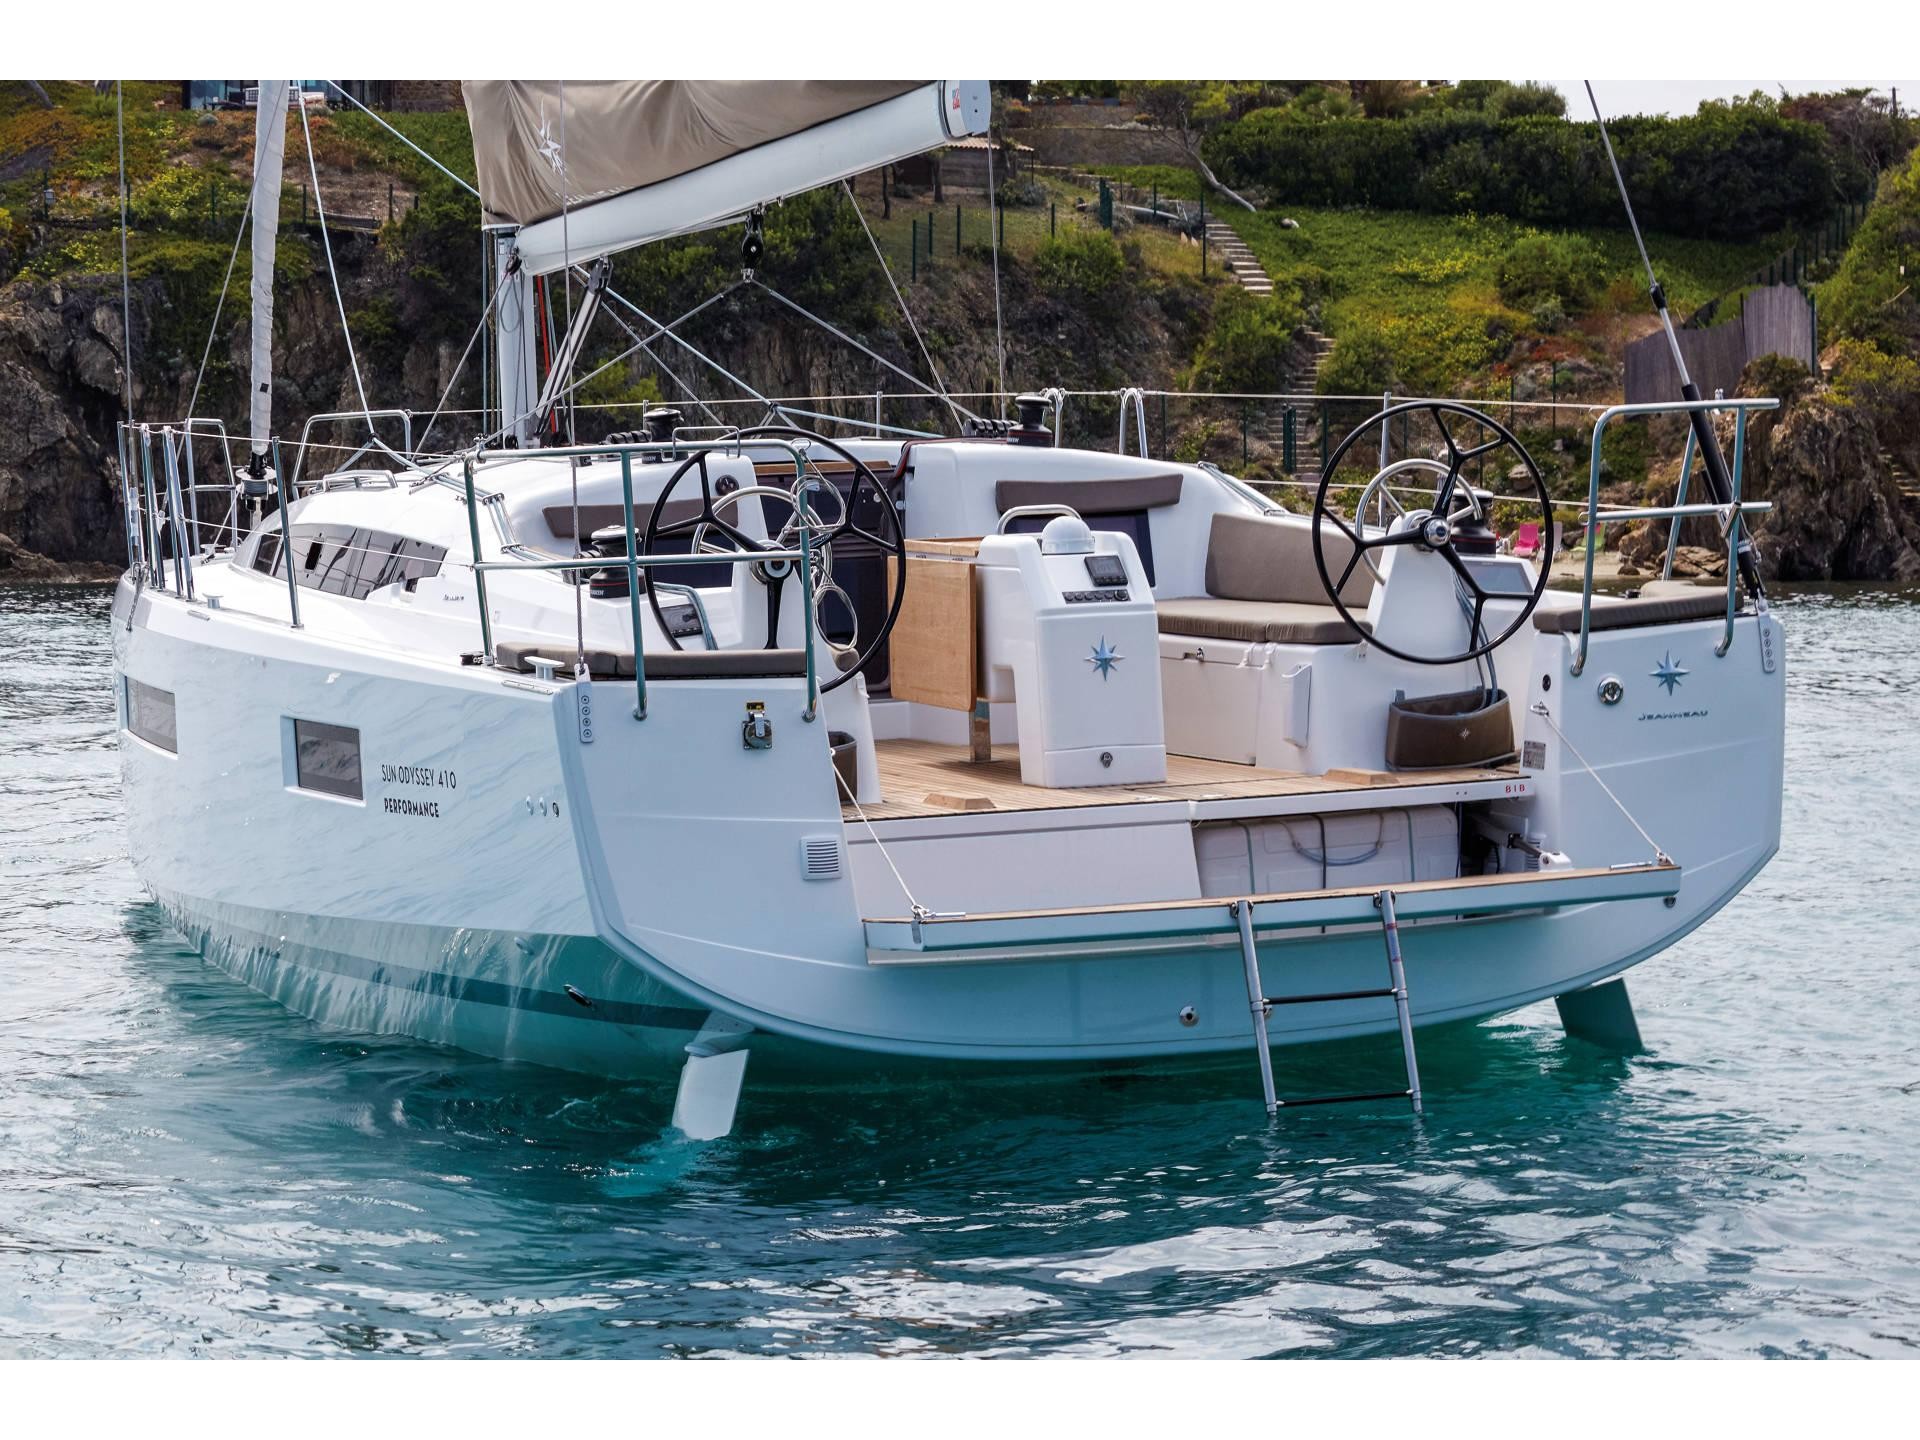 Sun Odyssey 410 - Yacht Charter Athens & Boat hire in Greece Athens and Saronic Gulf Athens Alimos Alimos Marina 1